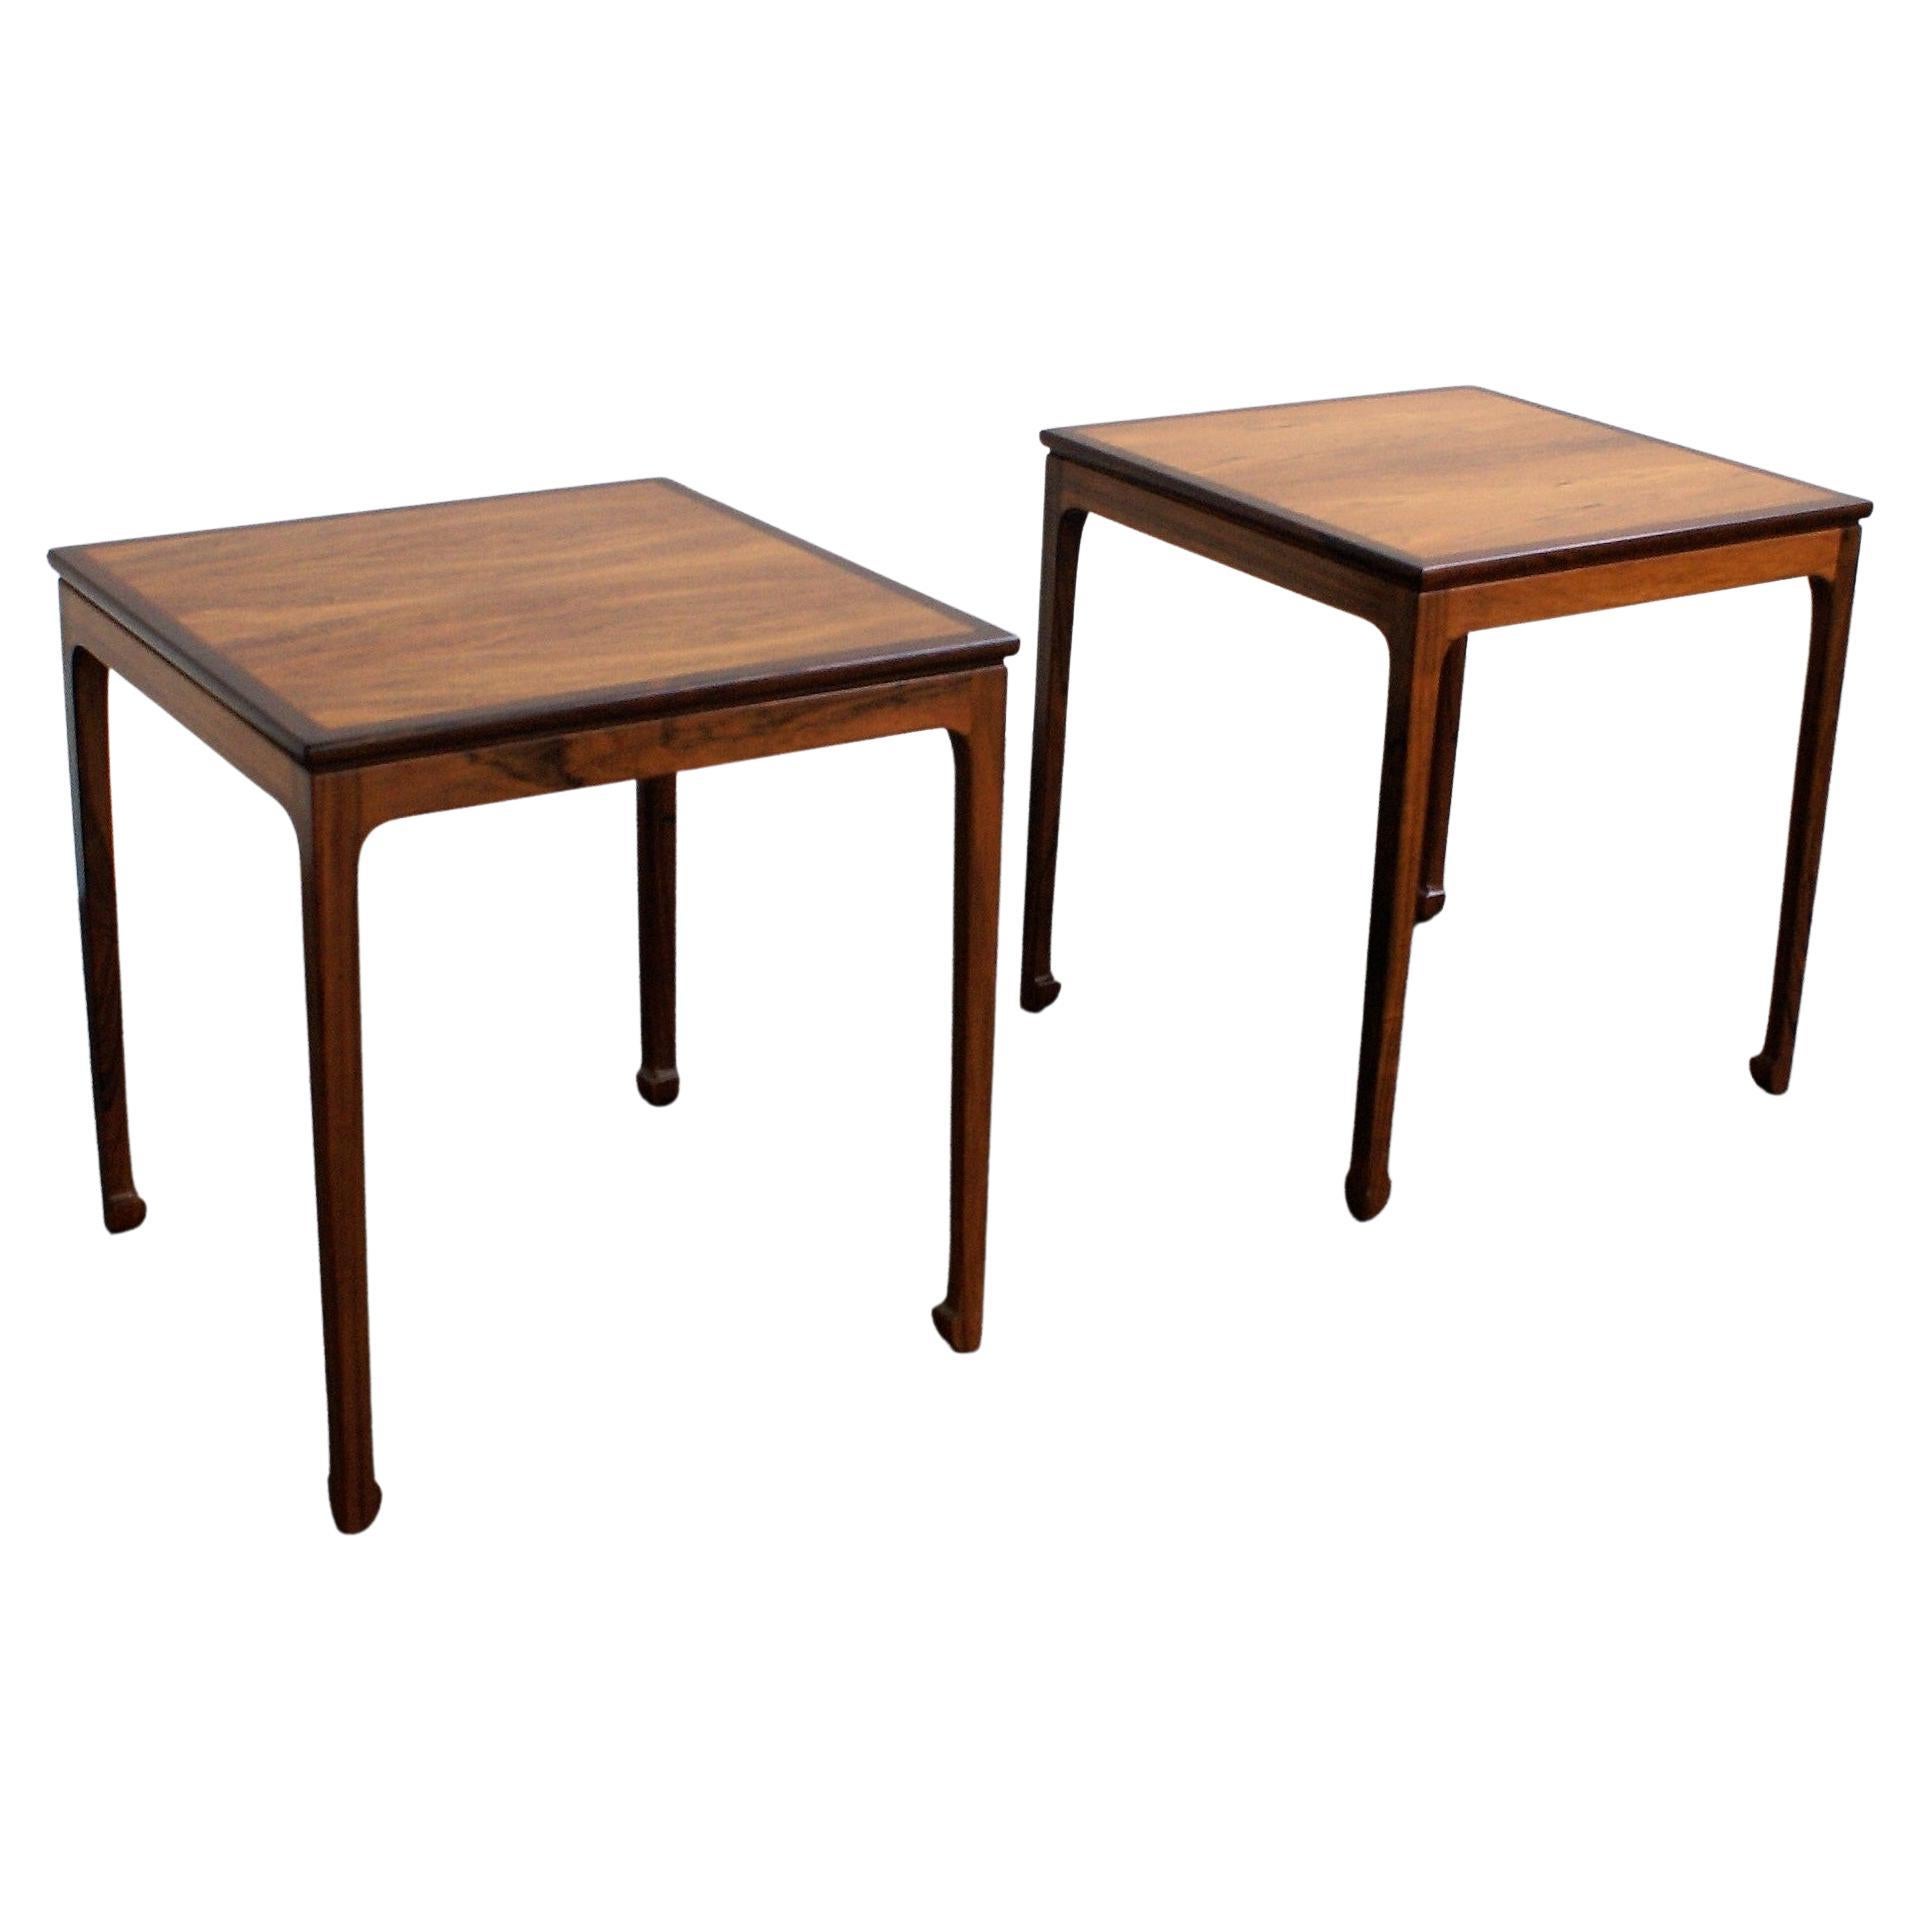 Ole Wanscher Pair of Side Tables in Brazilian Rosewood for A. J. Iversen, 1957 For Sale